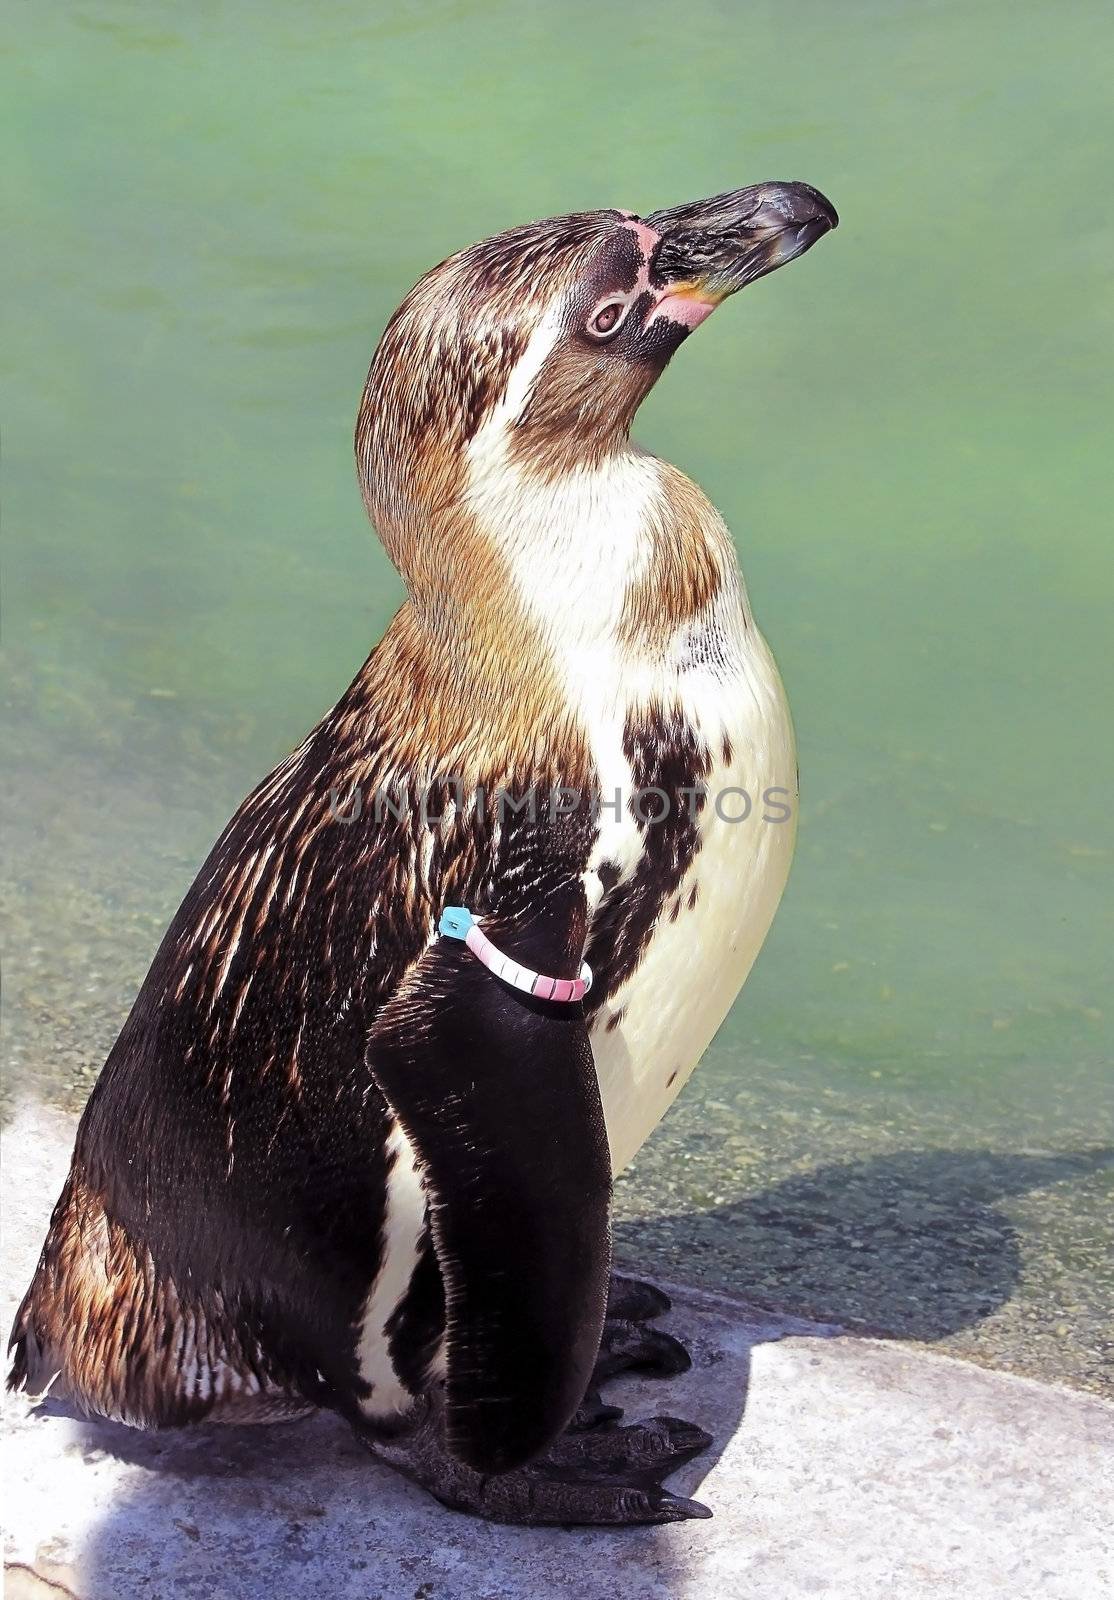 ringed penguin, standing near the water in the zoo